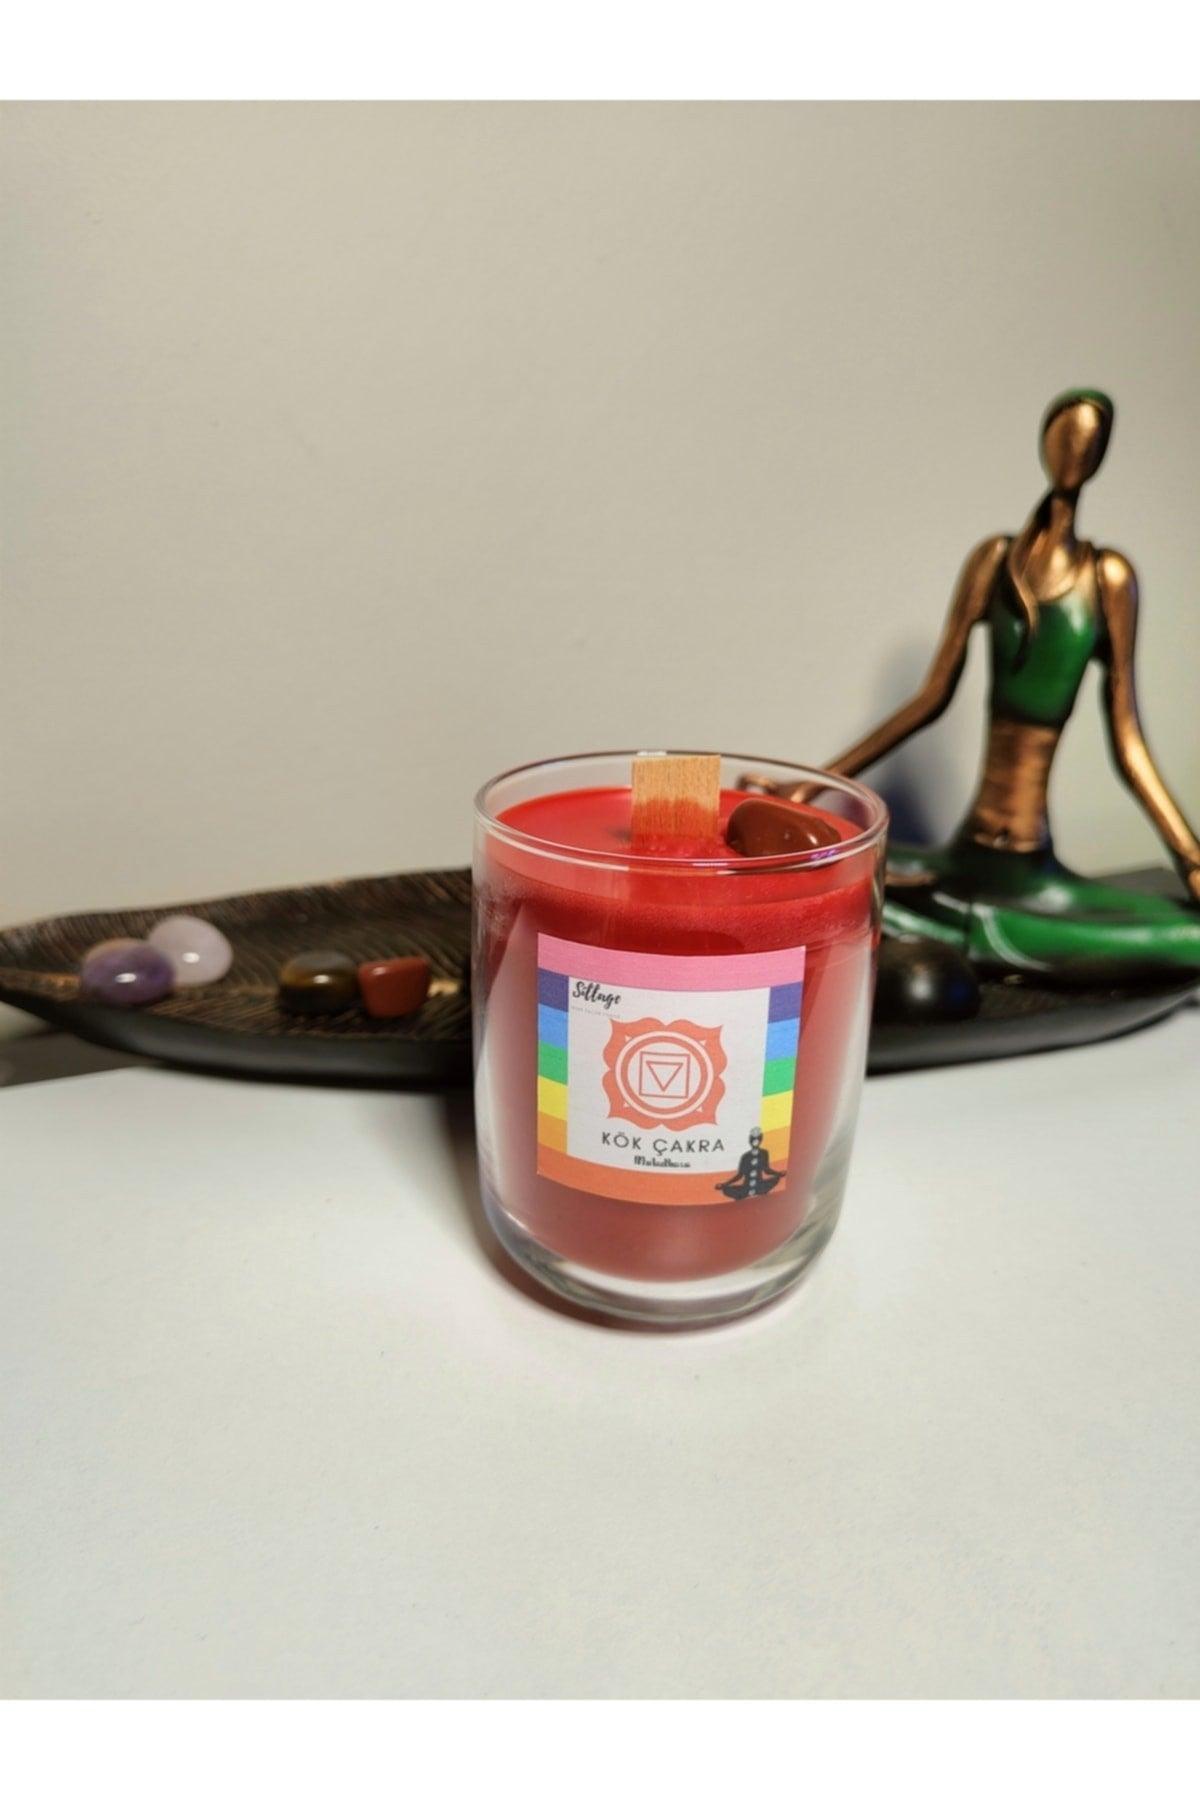 Root Chakra Meditation Yoga Healing Candle Hematite Chakra Stone And Root Chakra Special Cedar And Patchouli Scented - Swordslife